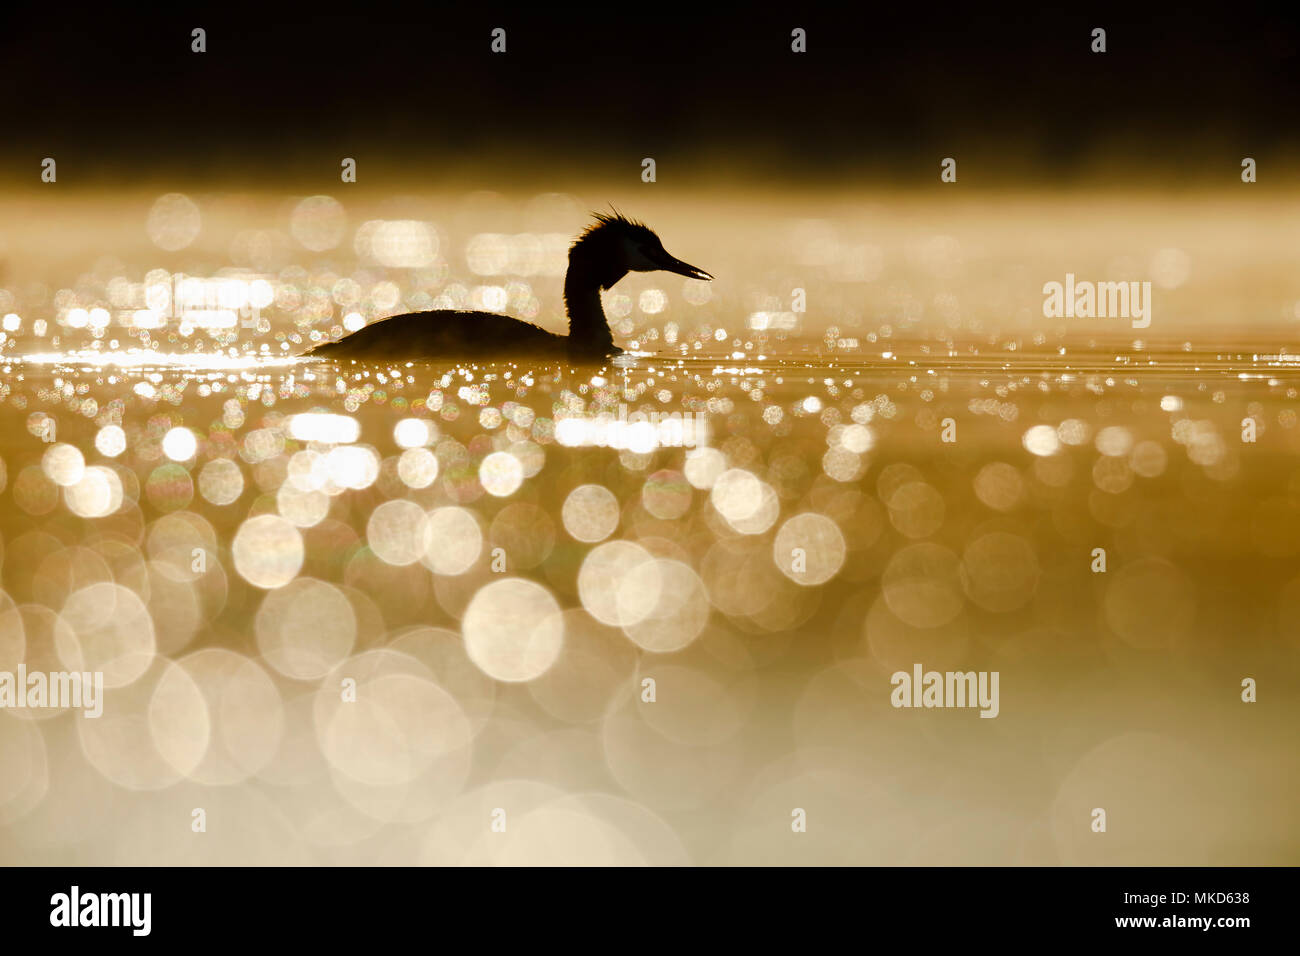 Great Crested Grebe (Podiceps cristatus) at sunrise on water, Dombes, France Stock Photo